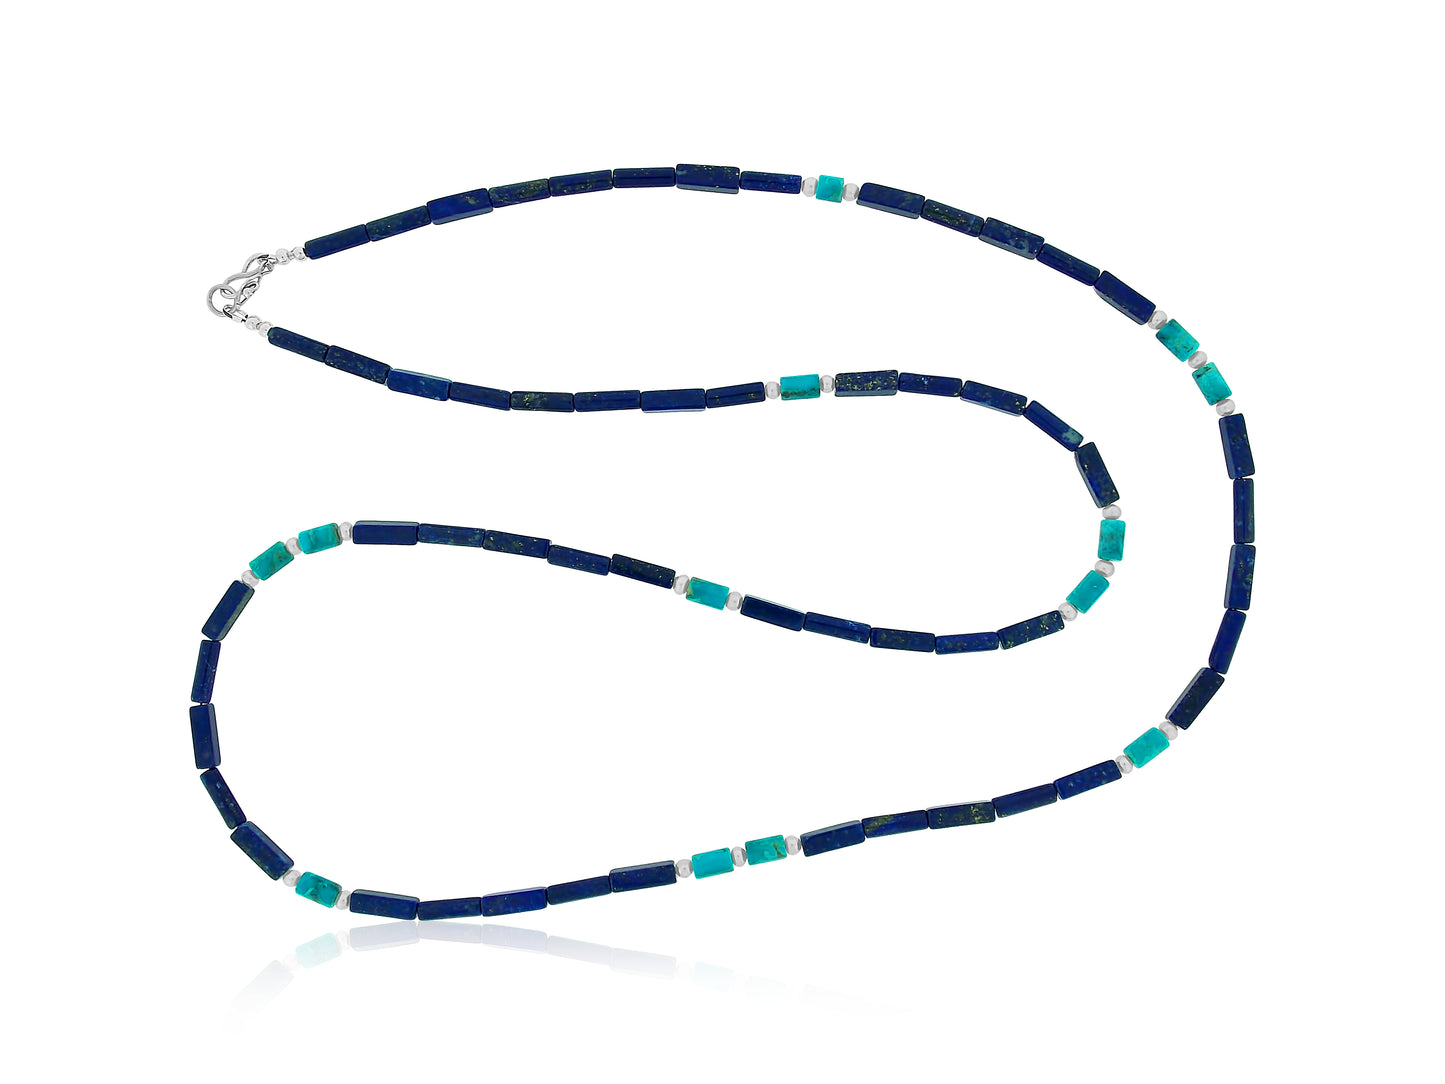 Lapis and Turquoise Long Necklace